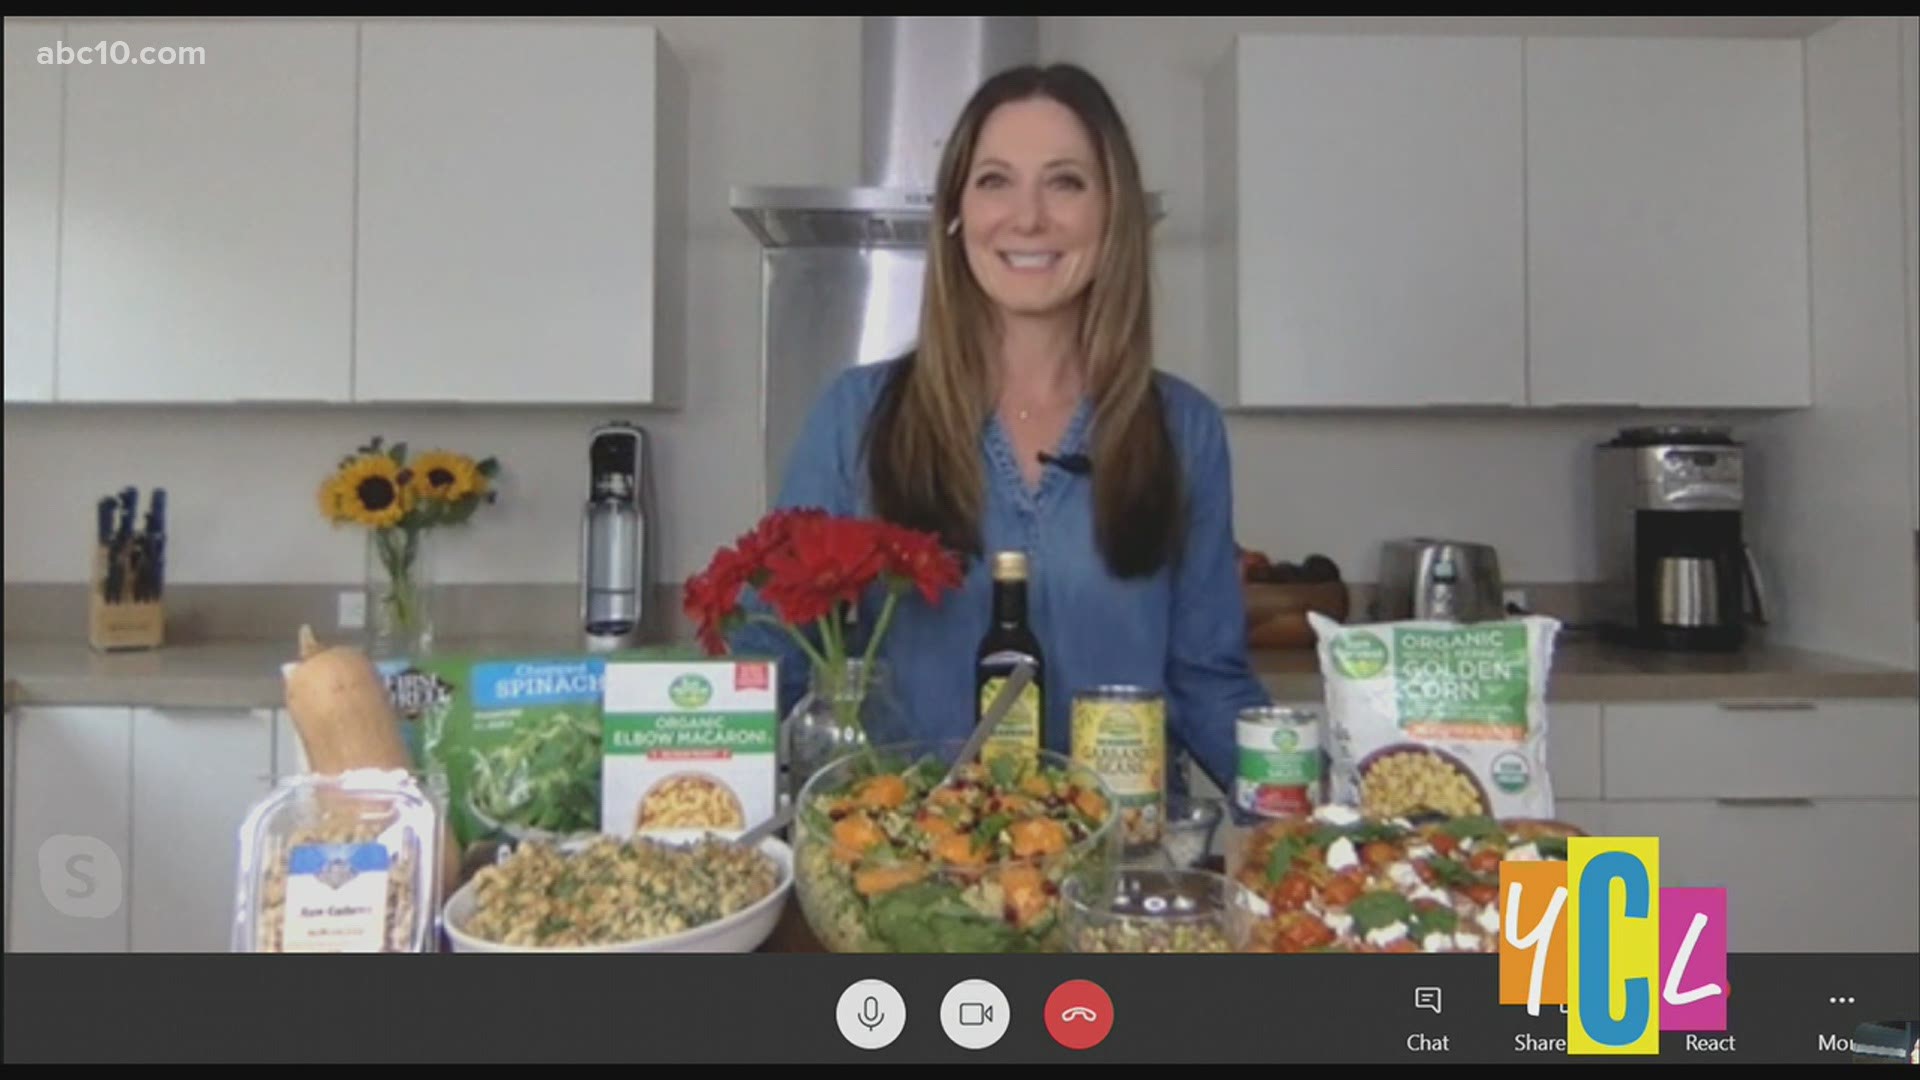 Registered Dietitian Patricia Bannon offers healthy, budget friendly options to enjoy a 'Meatless Monday' family meal. This segment is paid for by Smart & Final.